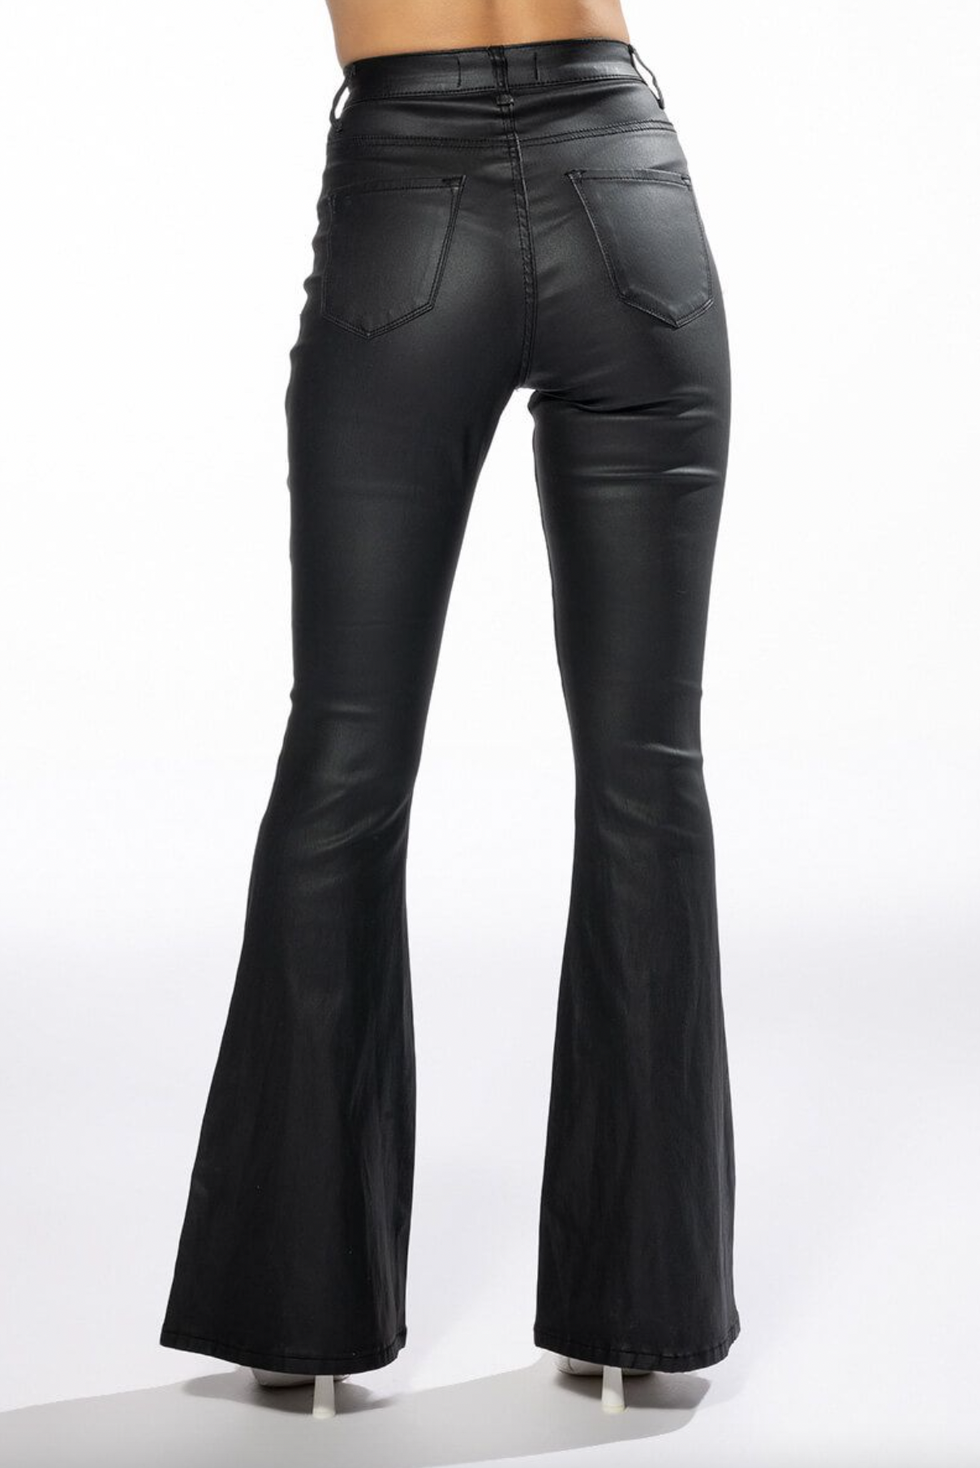 Low Rise Lace up Leather Pants -  Canada